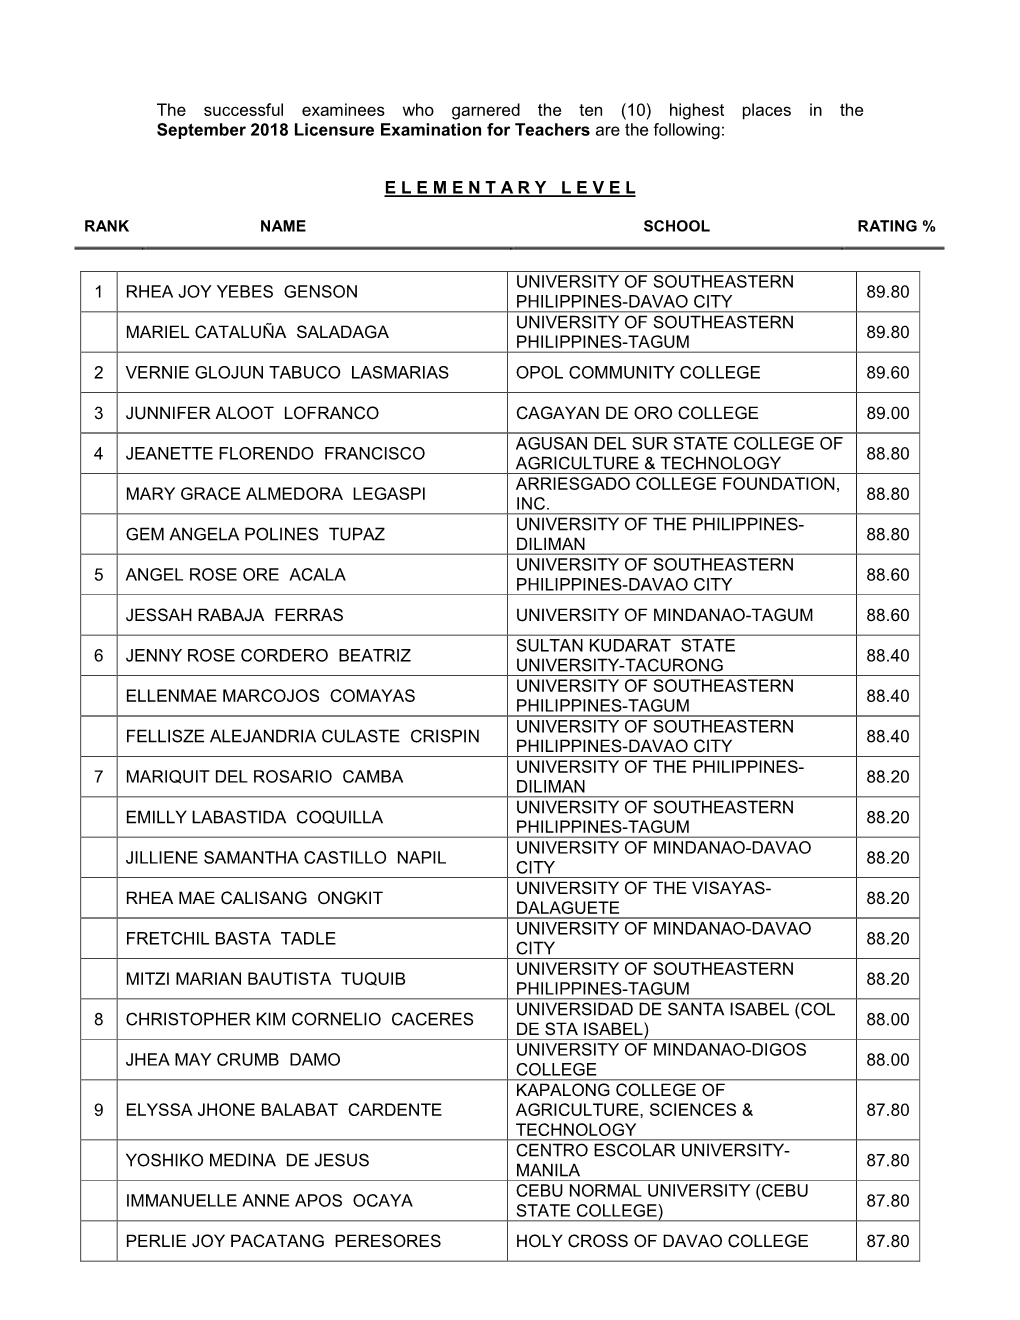 The Successful Examinees Who Garnered the Ten (10) Highest Places in the September 2018 Licensure Examination for Teachers Are the Following